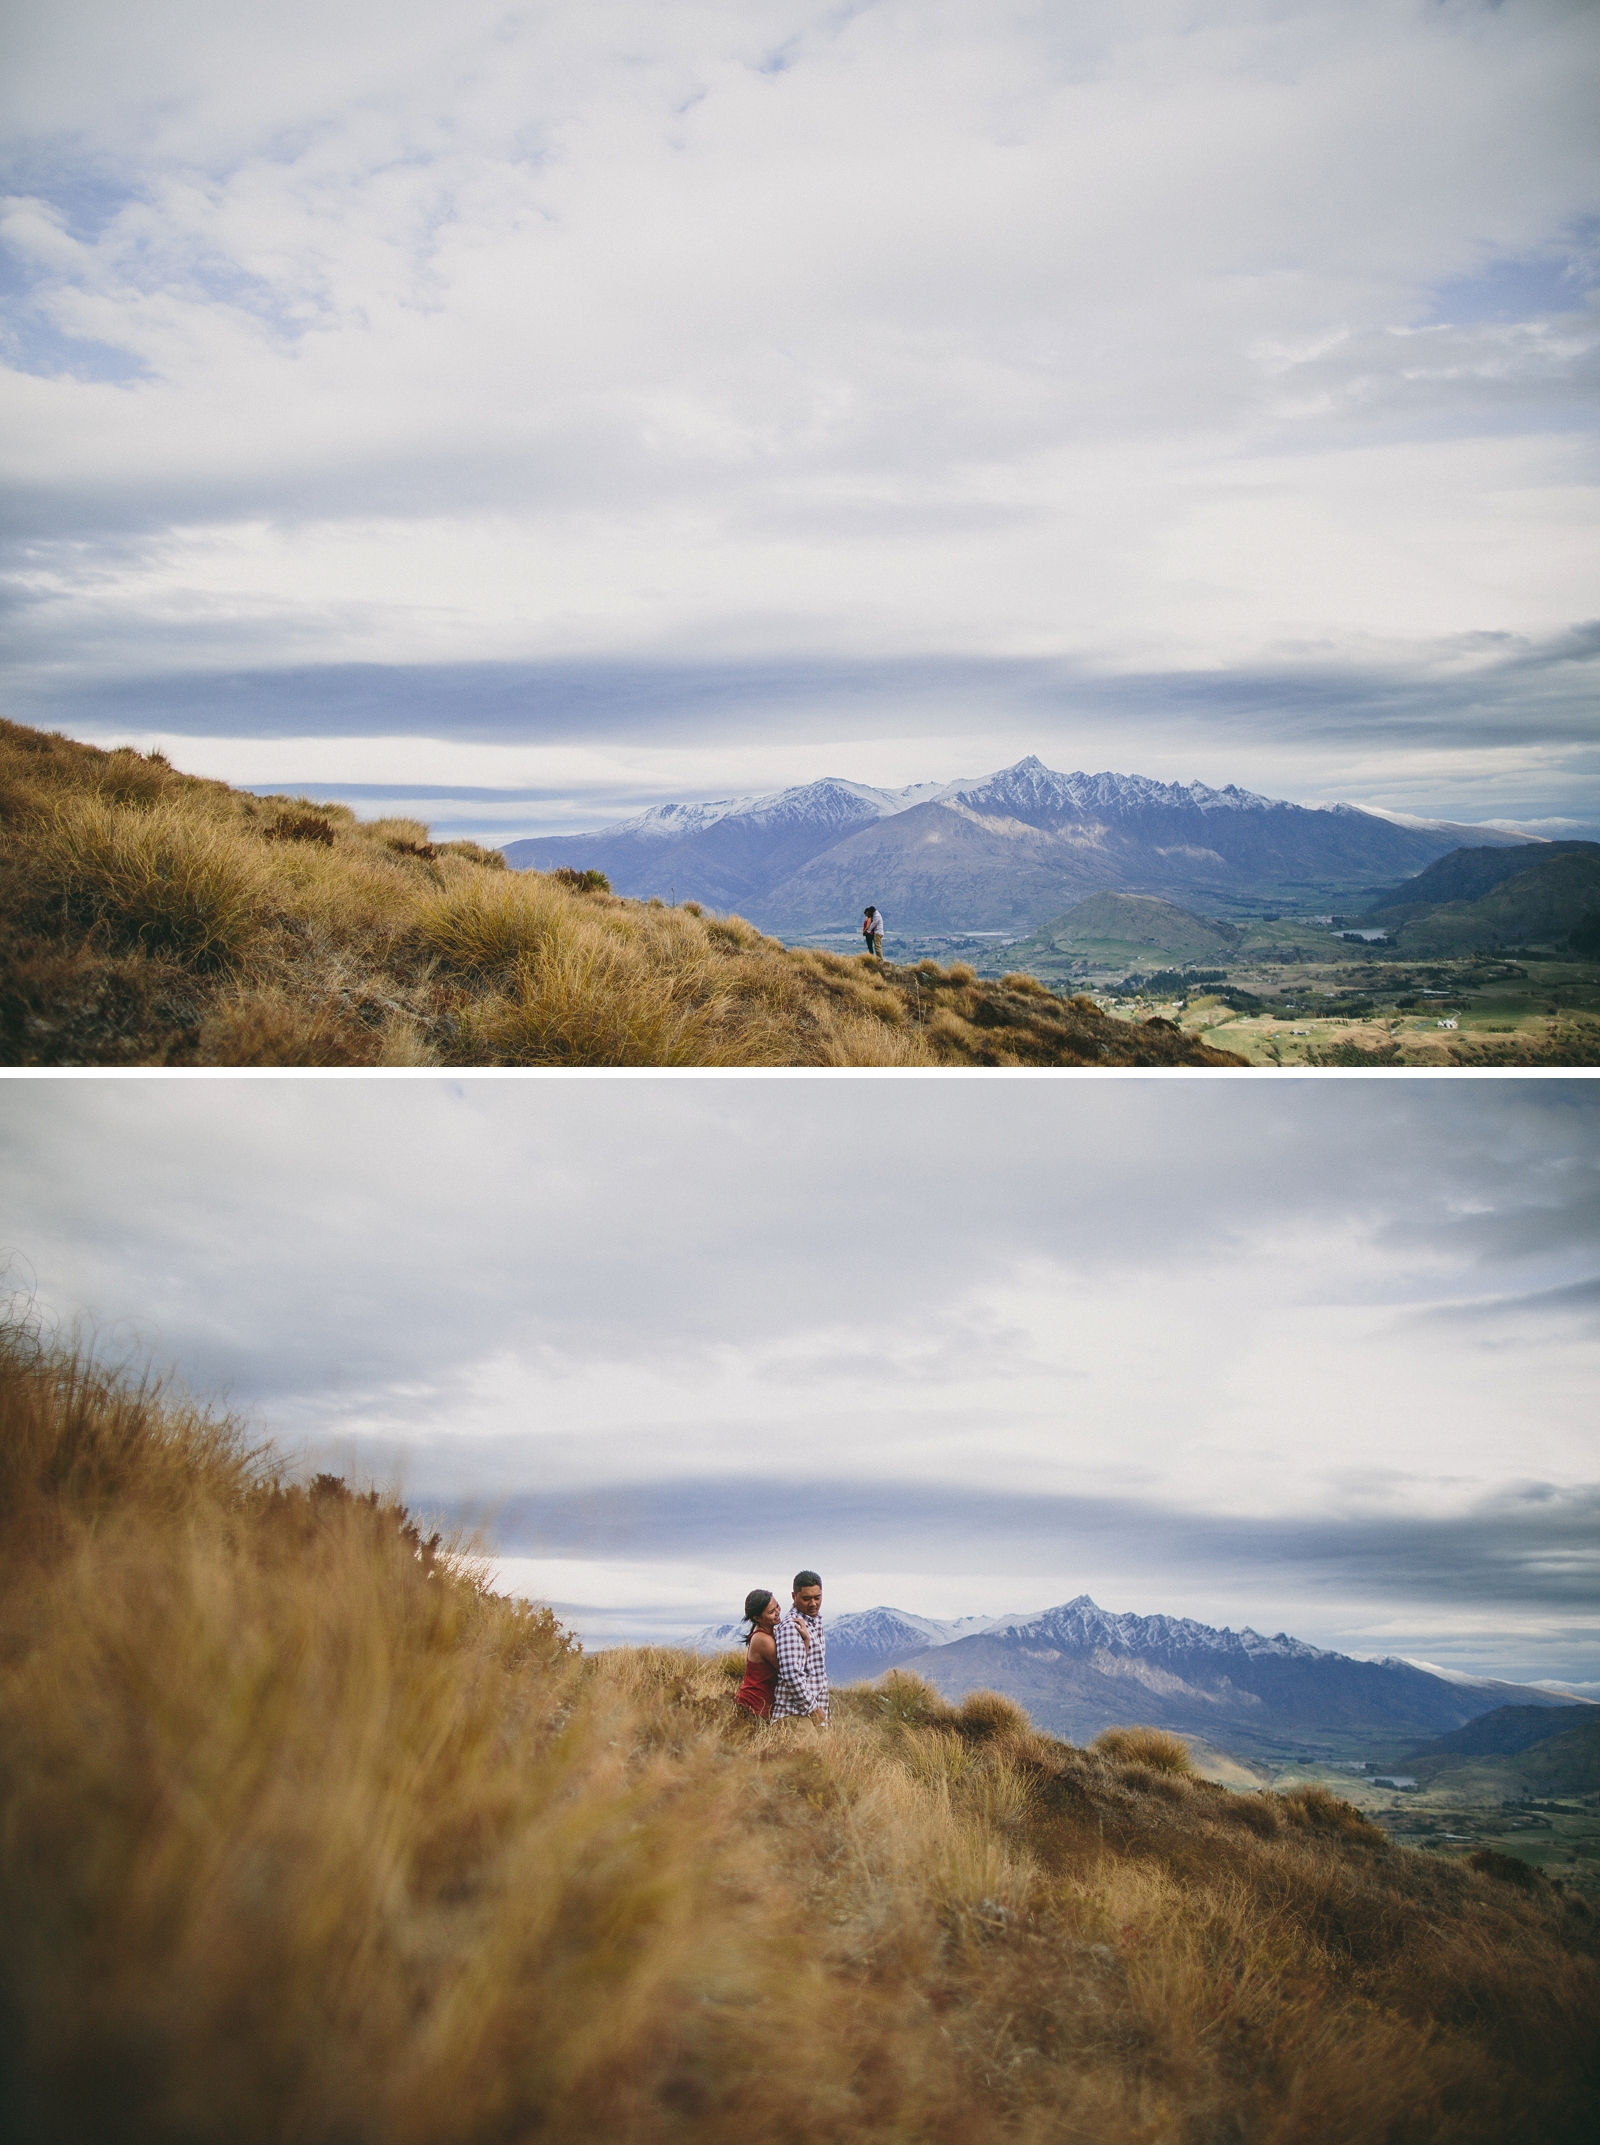 Queenstown Engagement Photographer - © Patty Lagera Photography